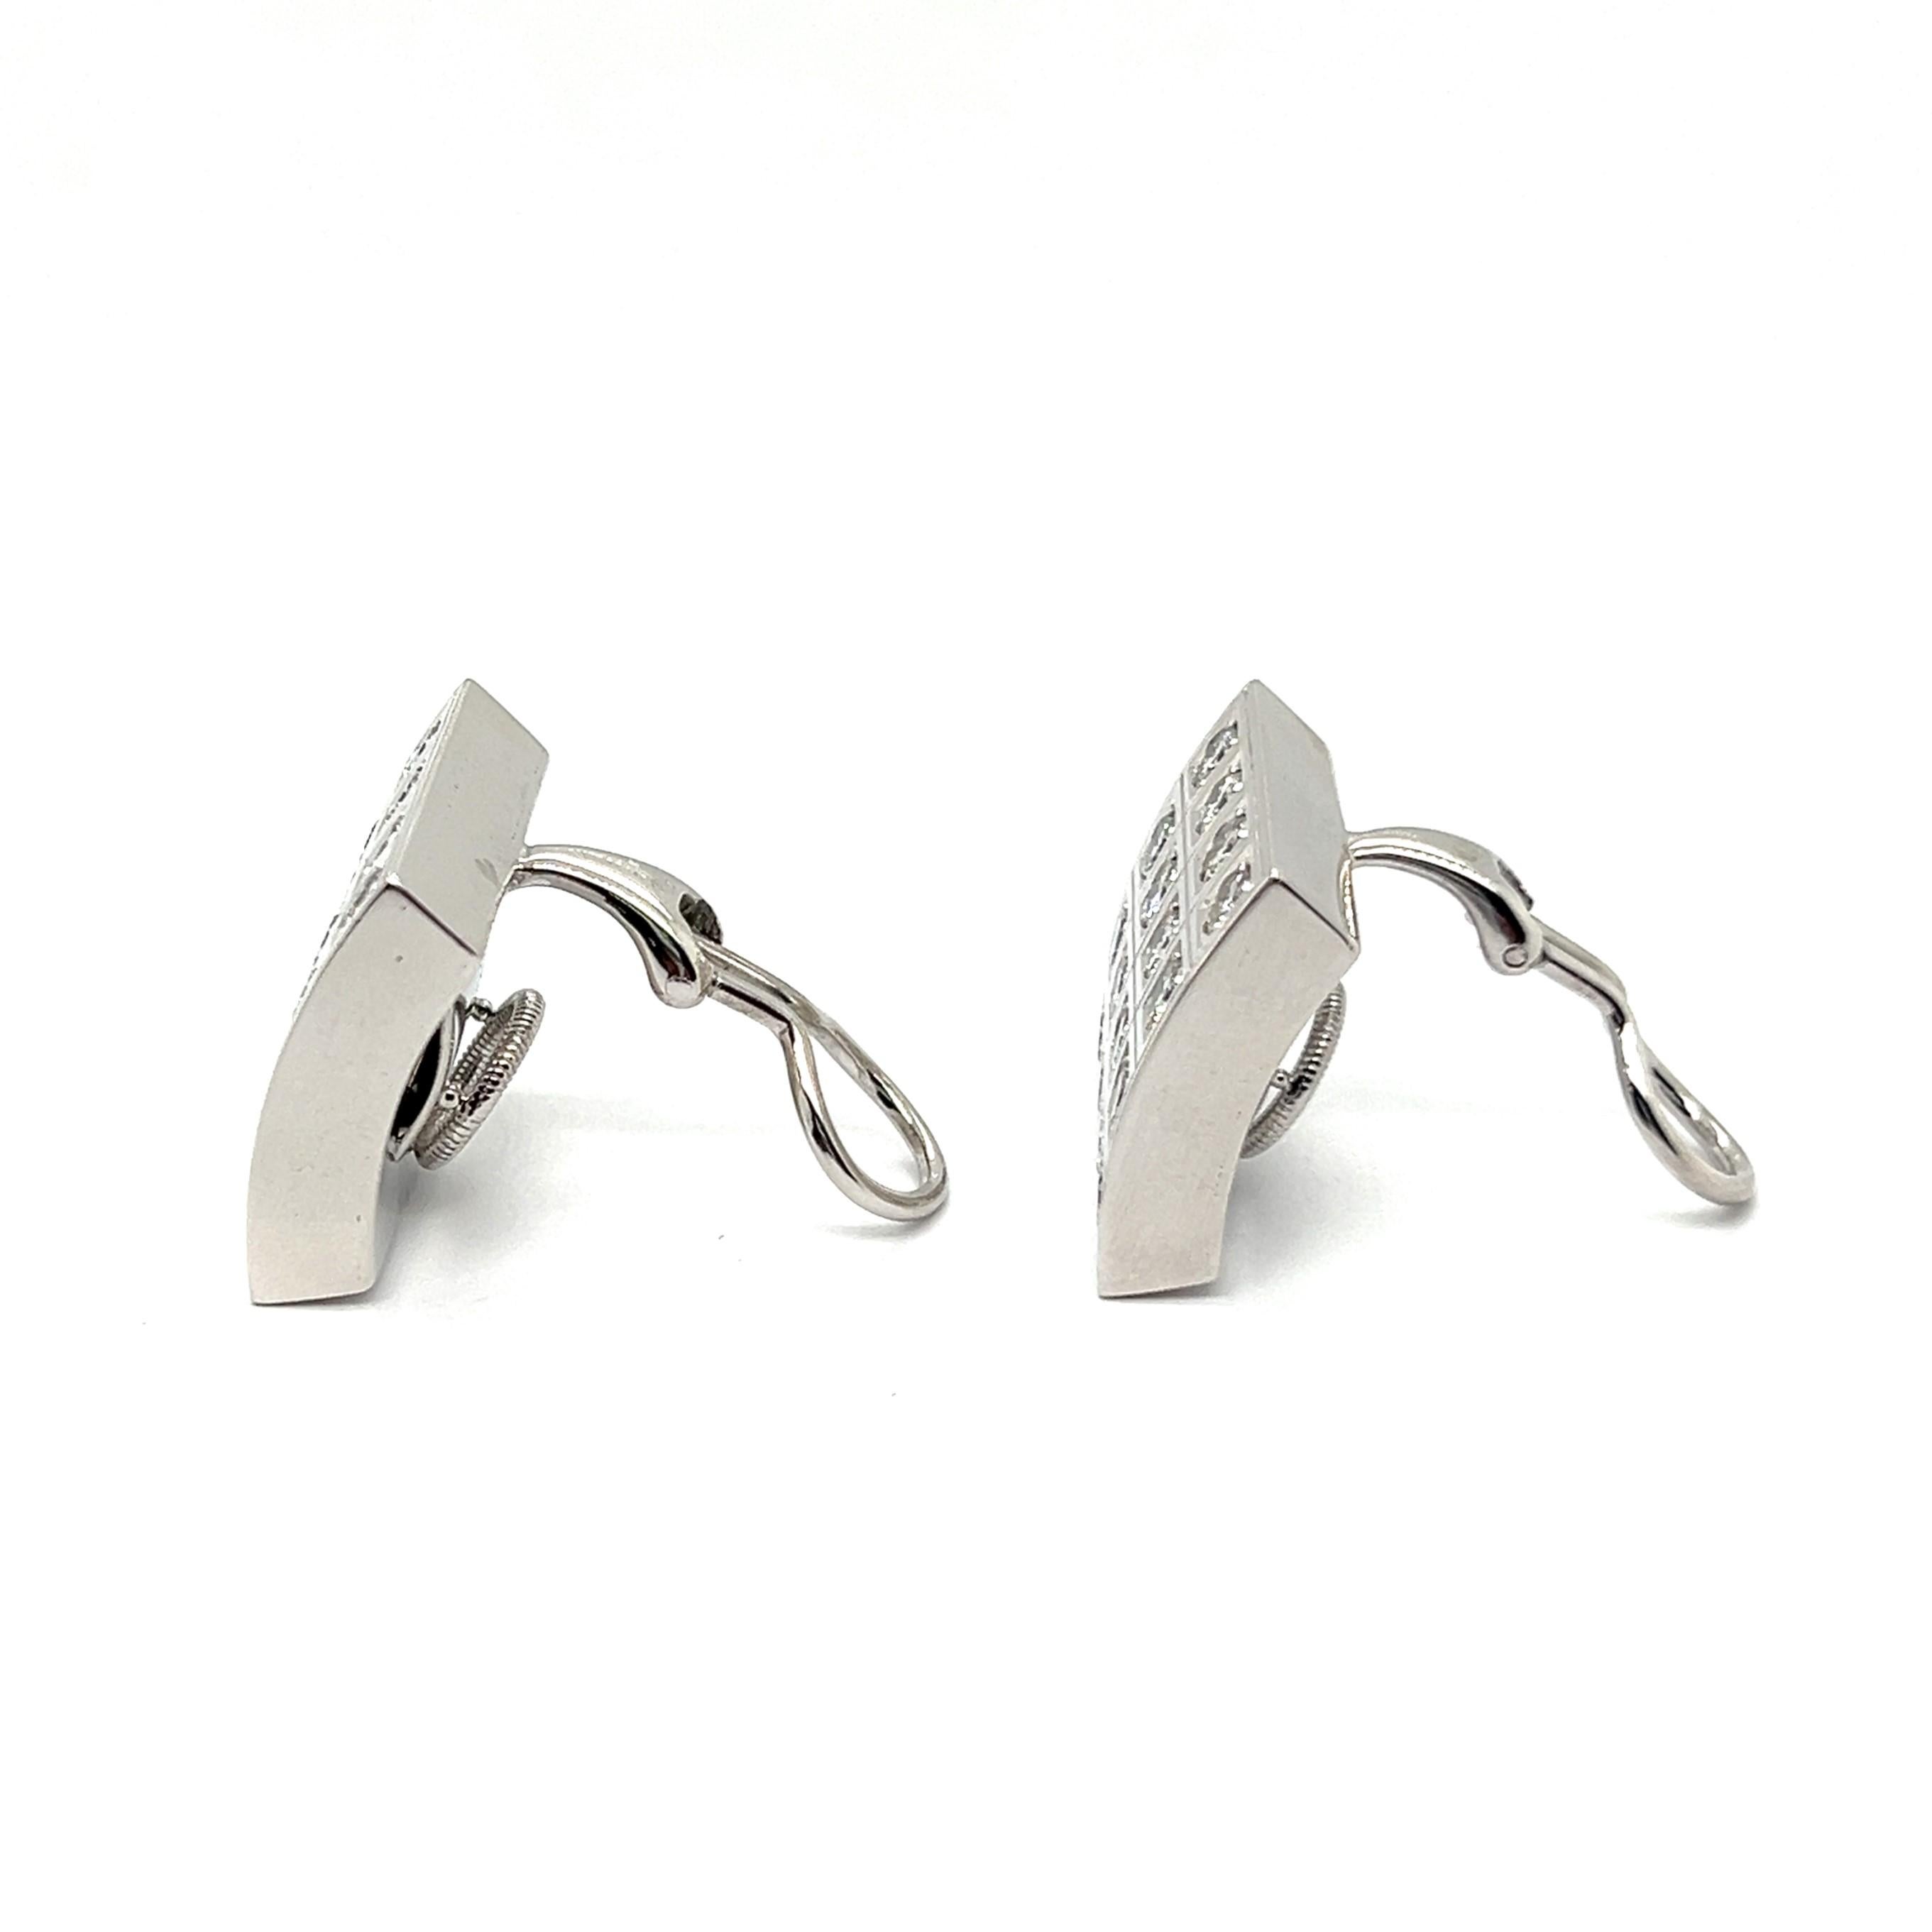  Bold Graphic Earrings with Diamonds in 18 Karat White Gold by Majo Fruithof For Sale 2